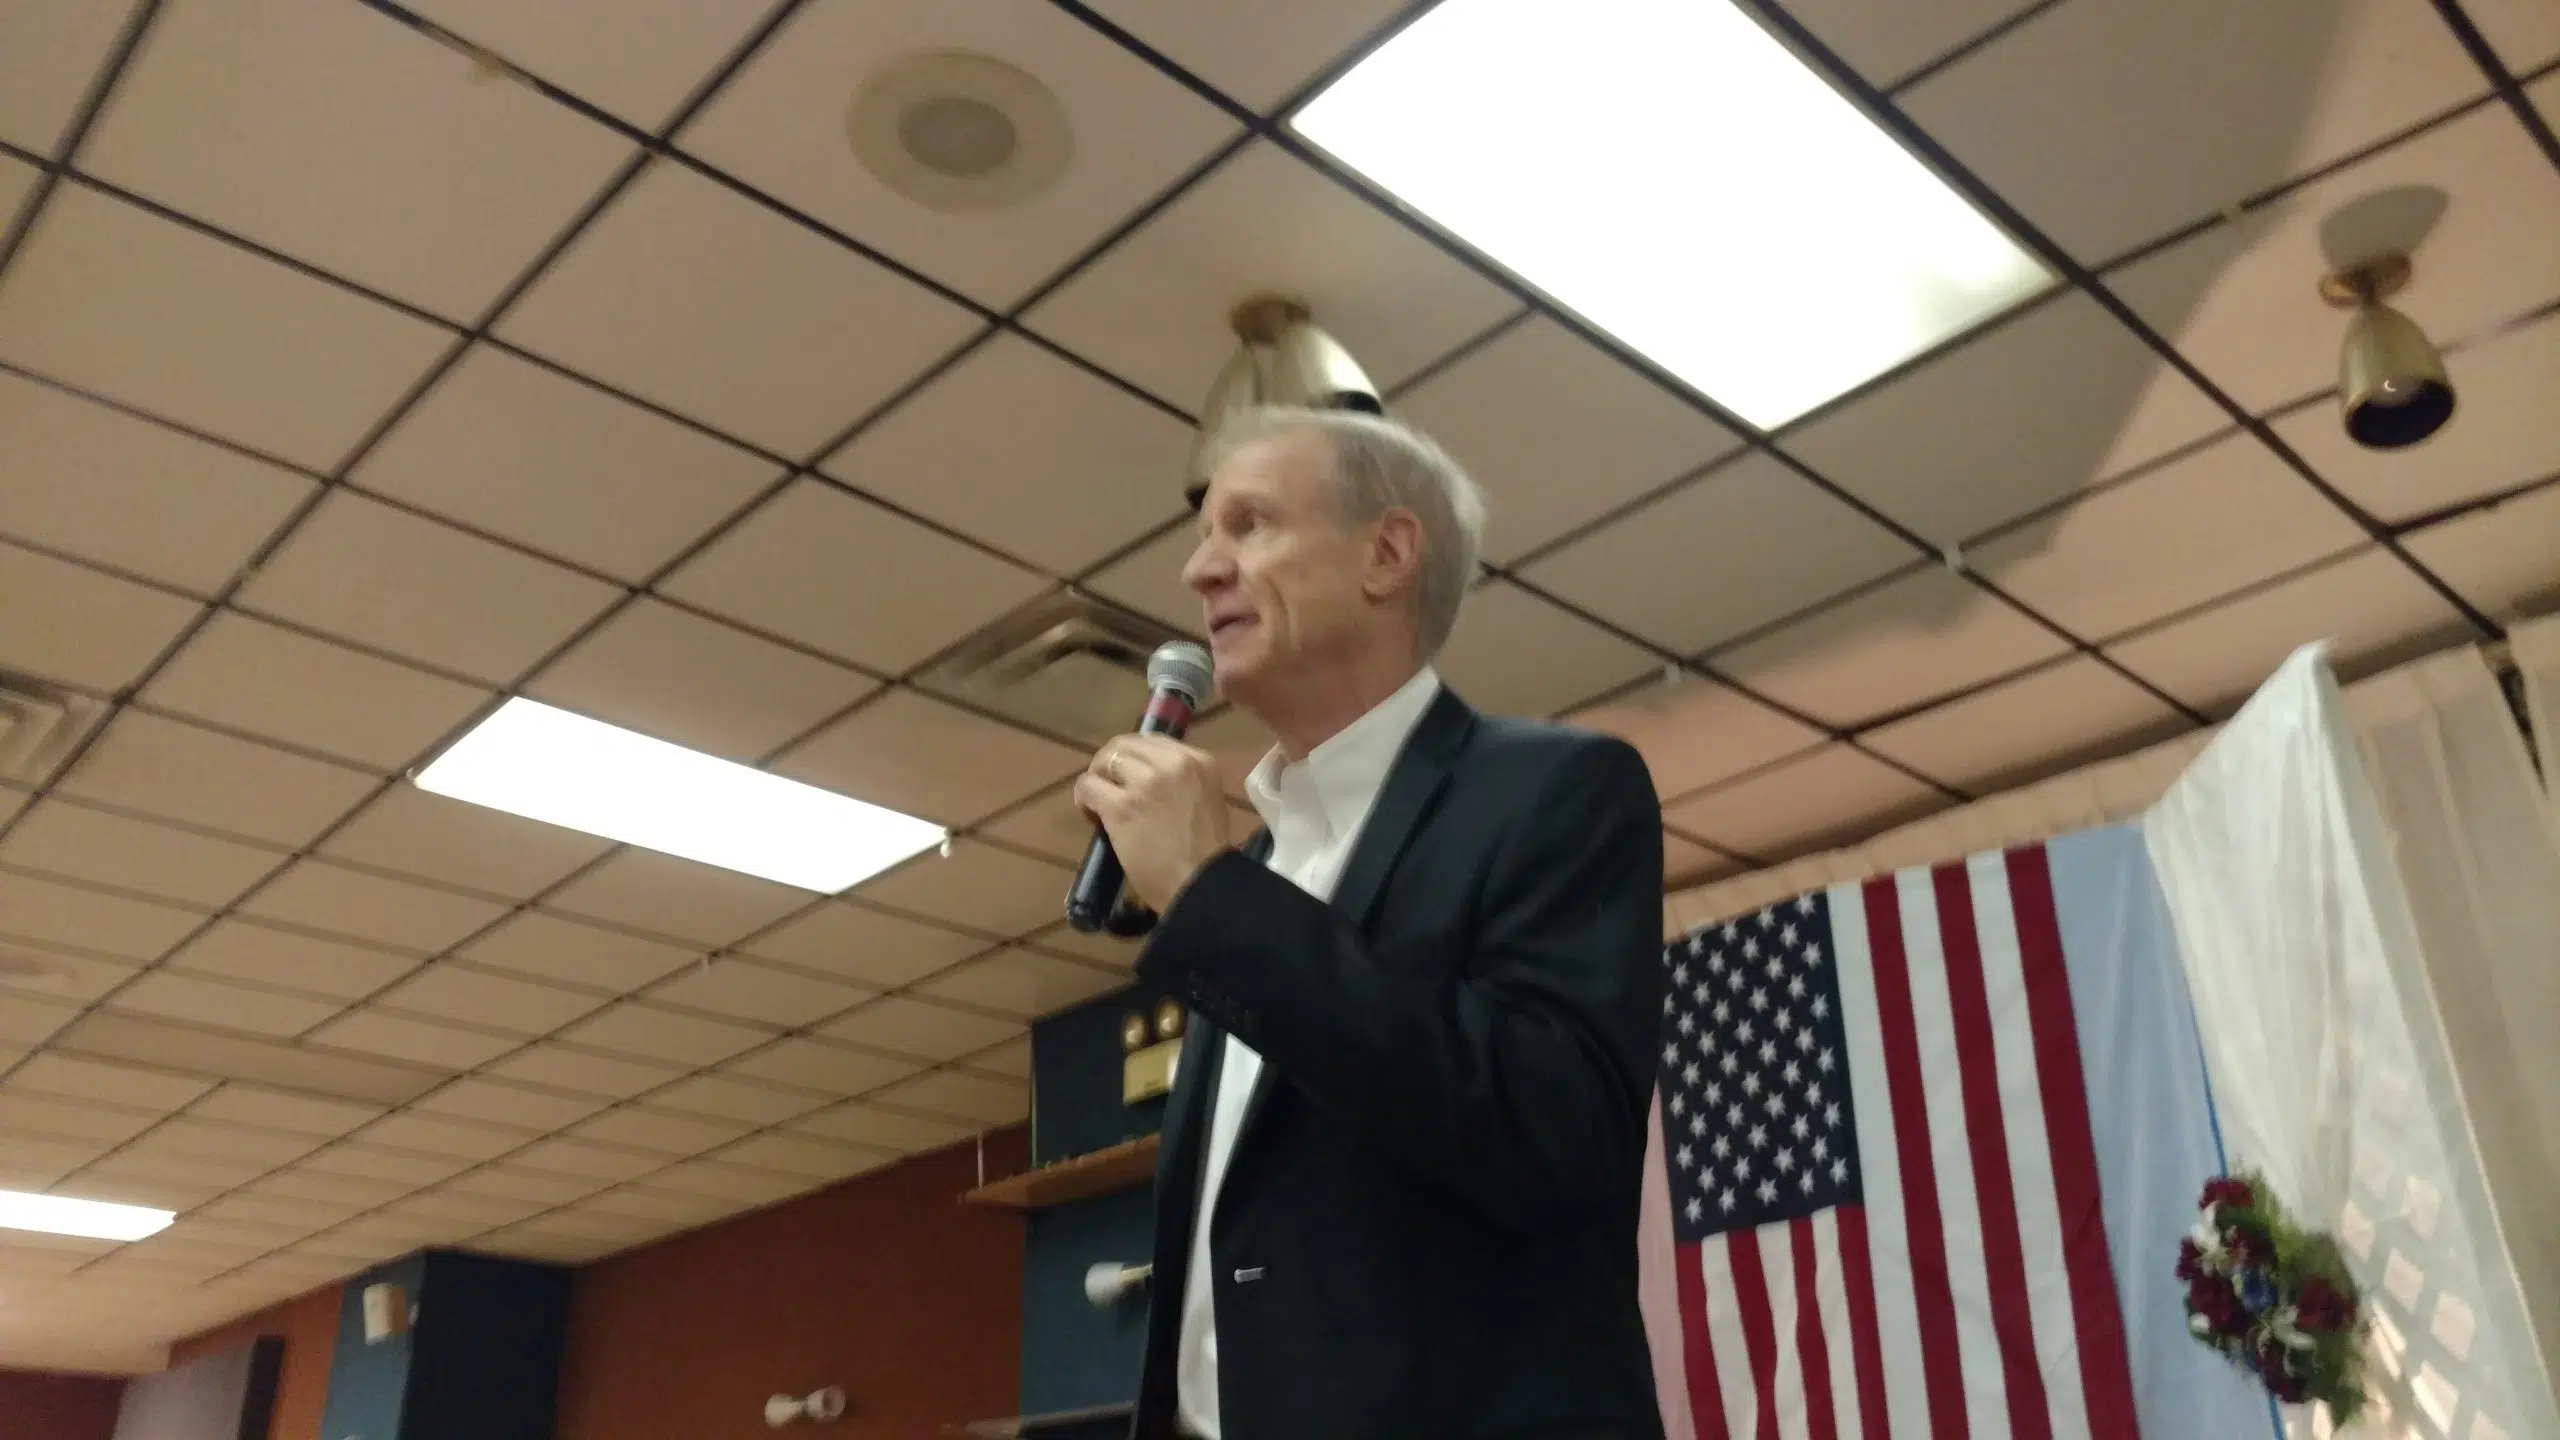 Gov Rauner blasts Madigan at Fayette Co LDD, says it's time to get him out as Speaker 